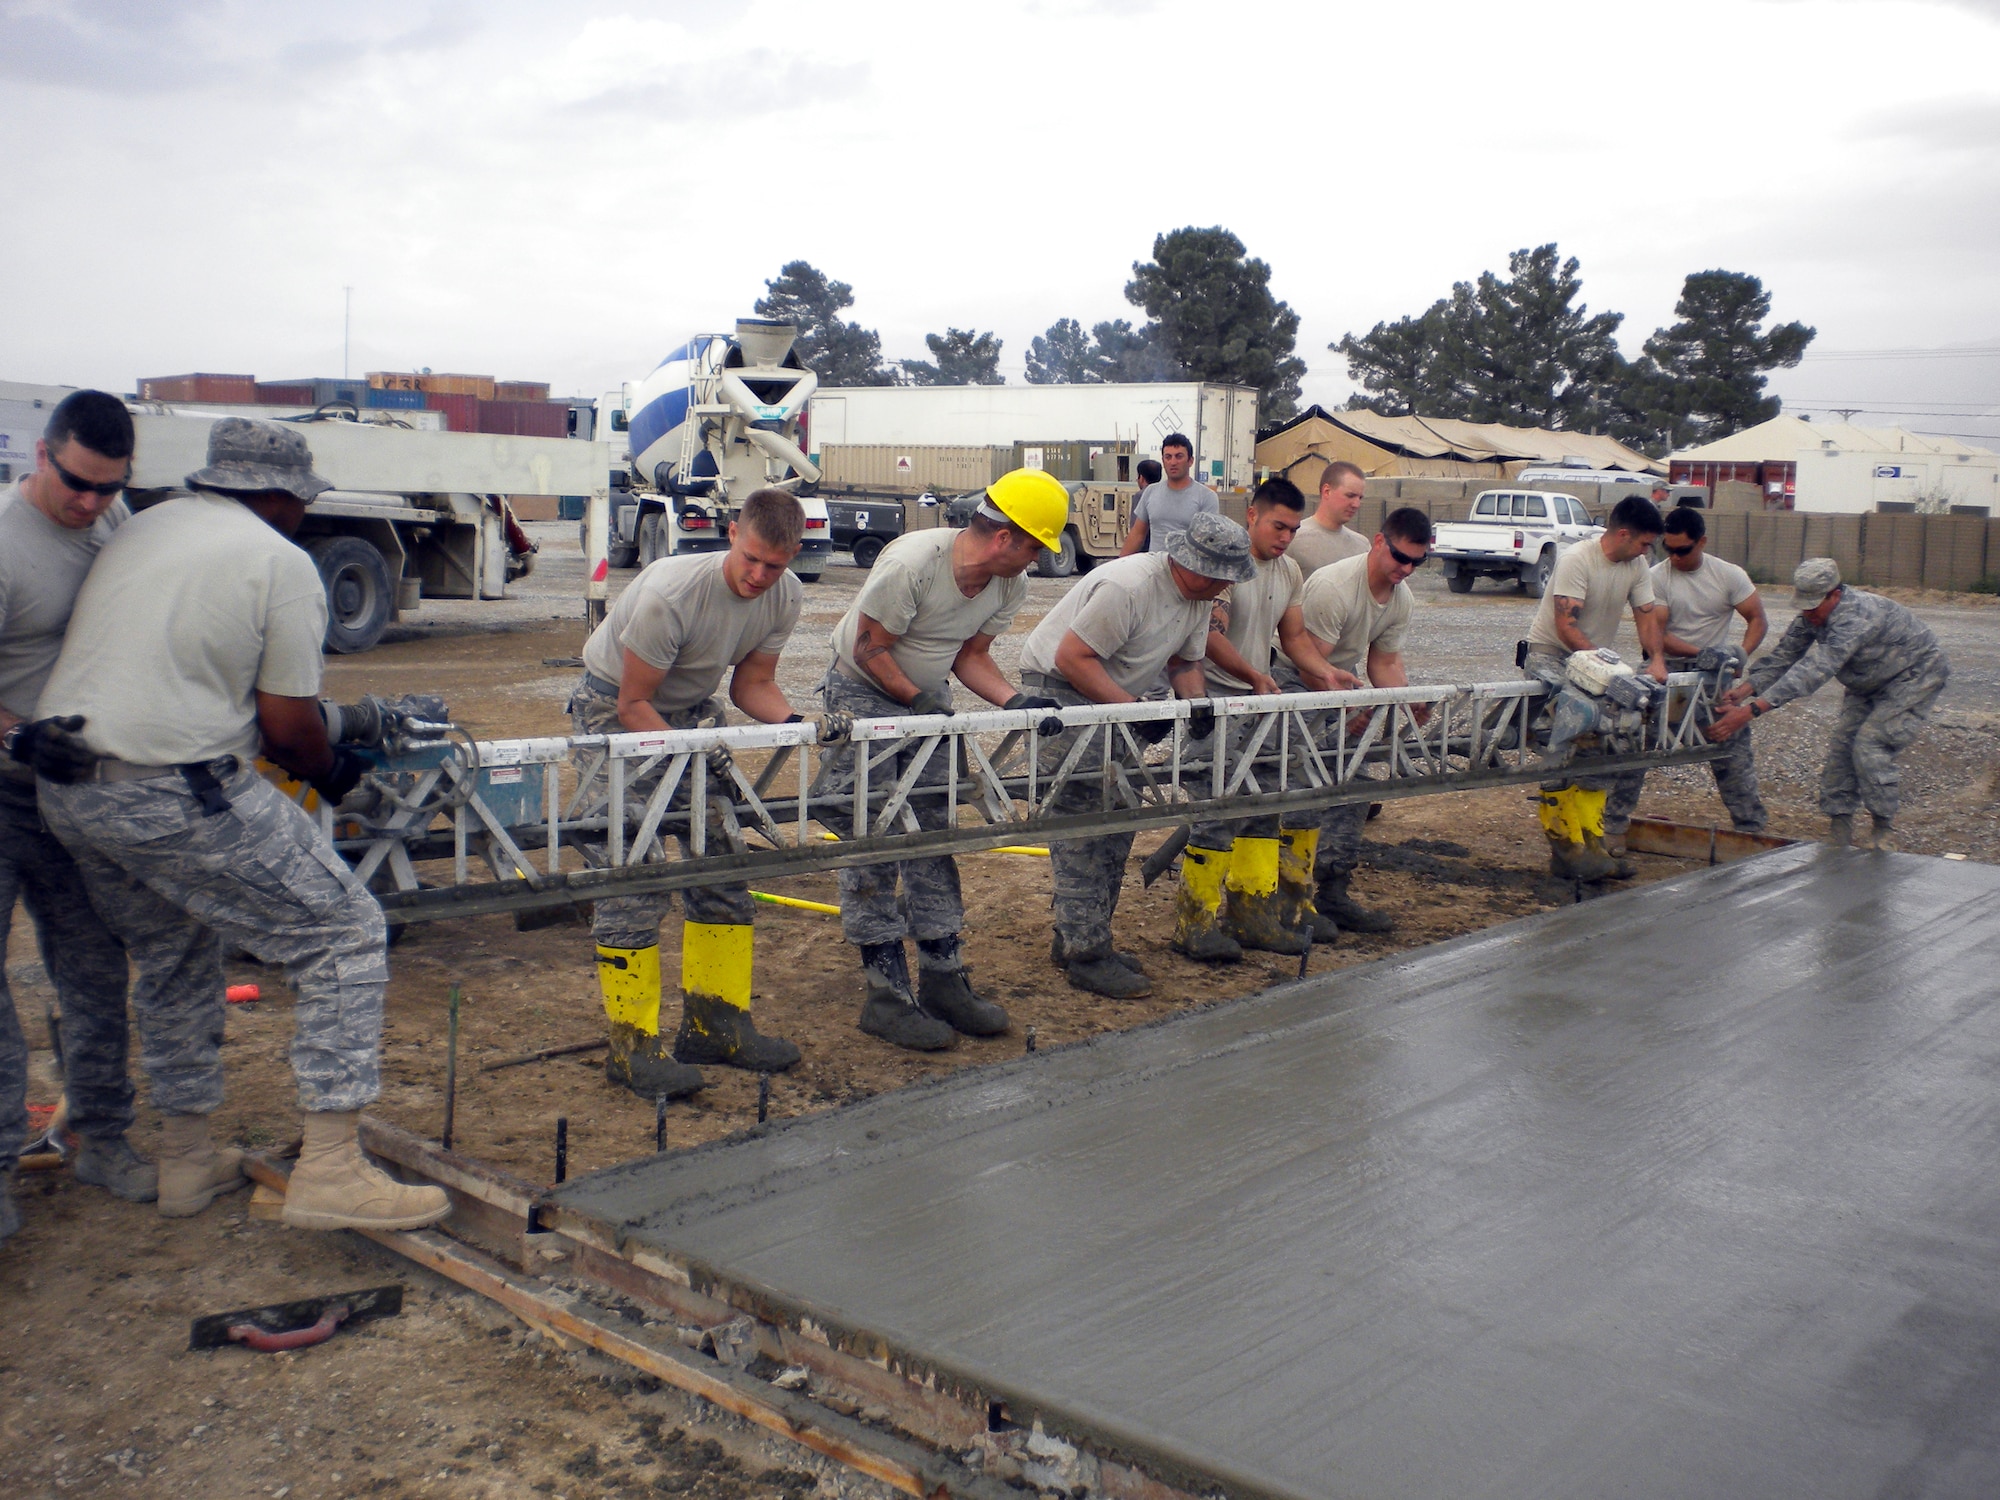 Reservists from Hill’s 419th Civil Engineer Squadron and other Airmen remove a power screed from freshly poured cement where a tent will be erected. (Courtesy photo)